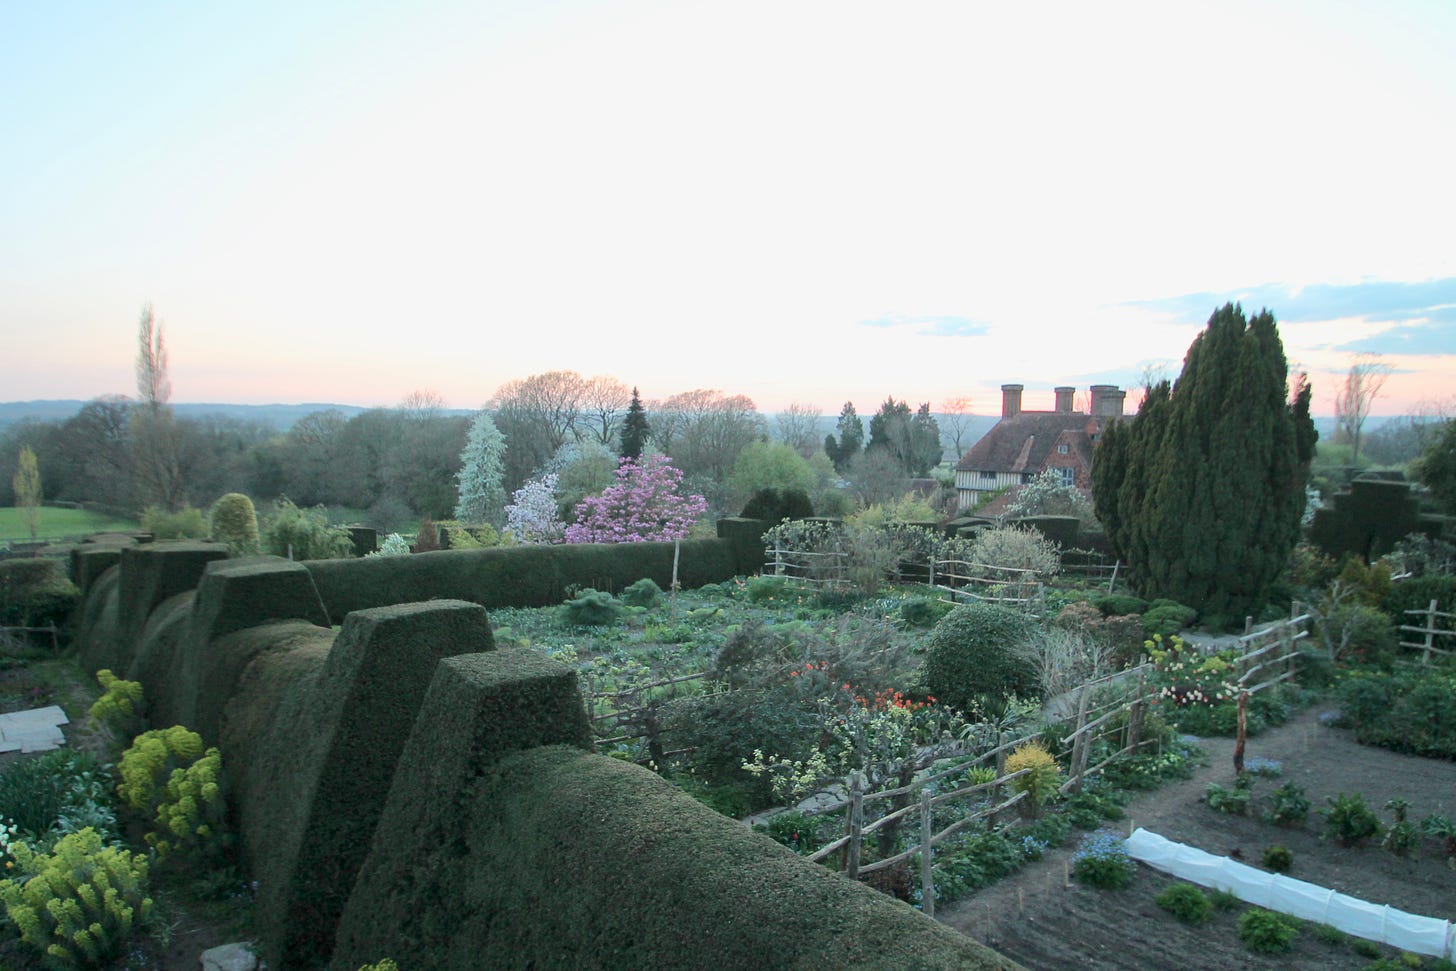 Overhead view of the gardens at Great Dixter. Photo by Molly Hendry